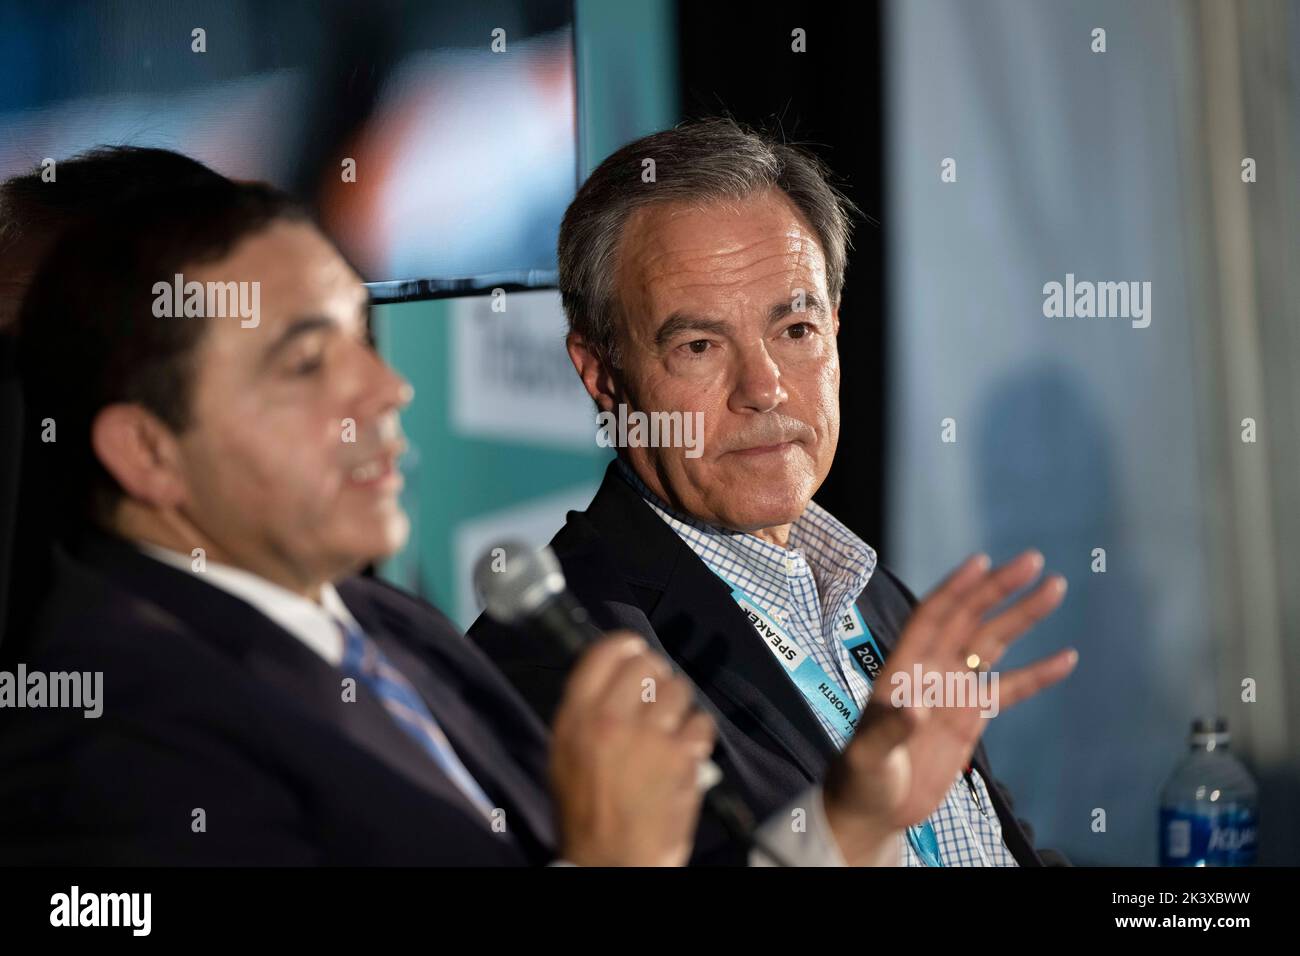 Former Texas House Speaker JOE STRAUS during an interview session at the annual Texas Tribune Festival in downtown Austin on September 24, 2022.  Straus is chair of a political action committee in Texas. Stock Photo